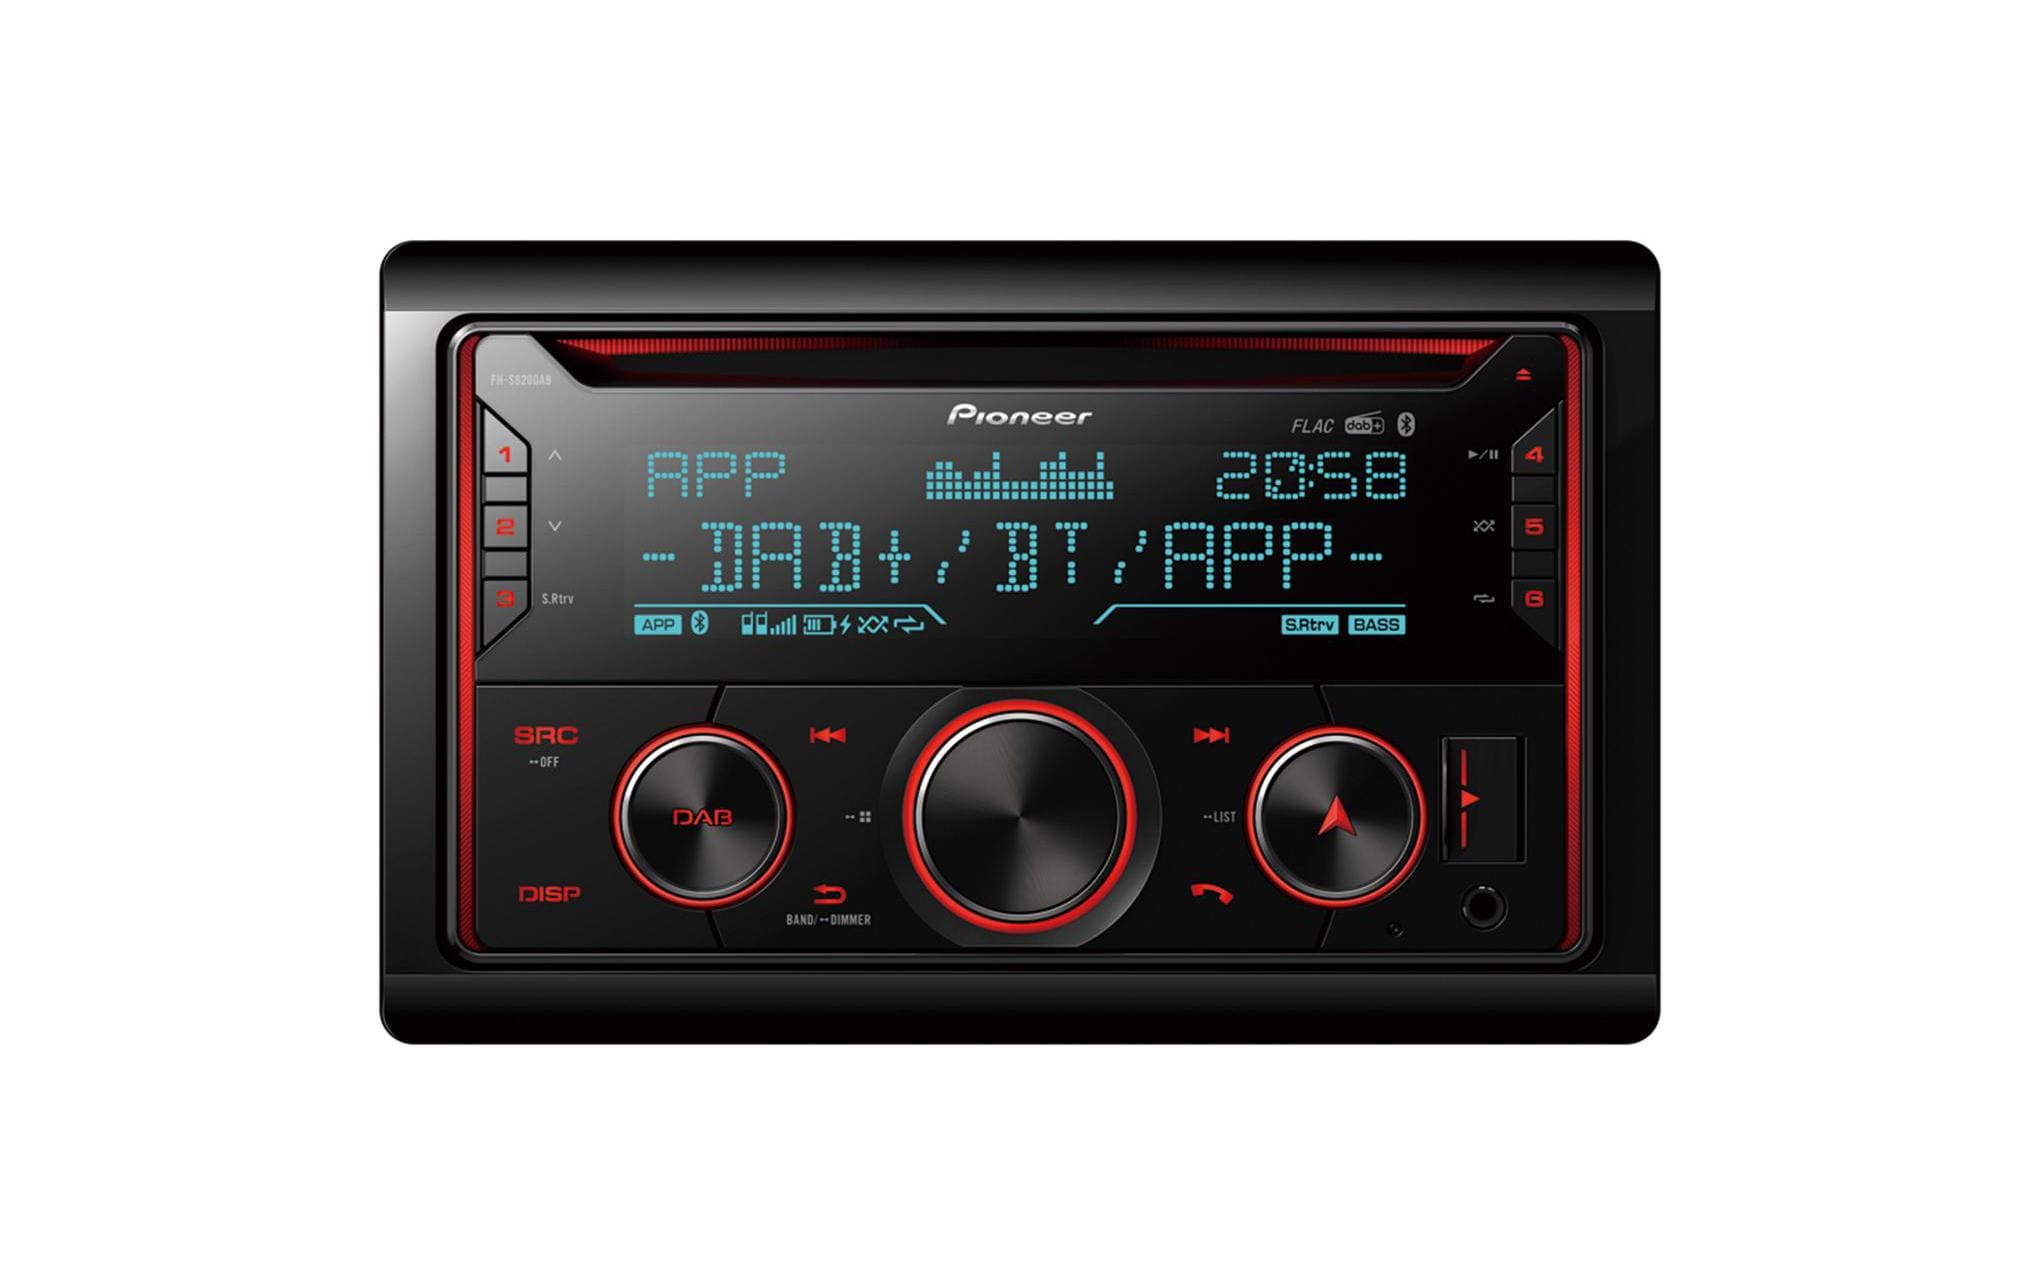 Pioneer Moniceiver FH-S820DAB 2 DIN